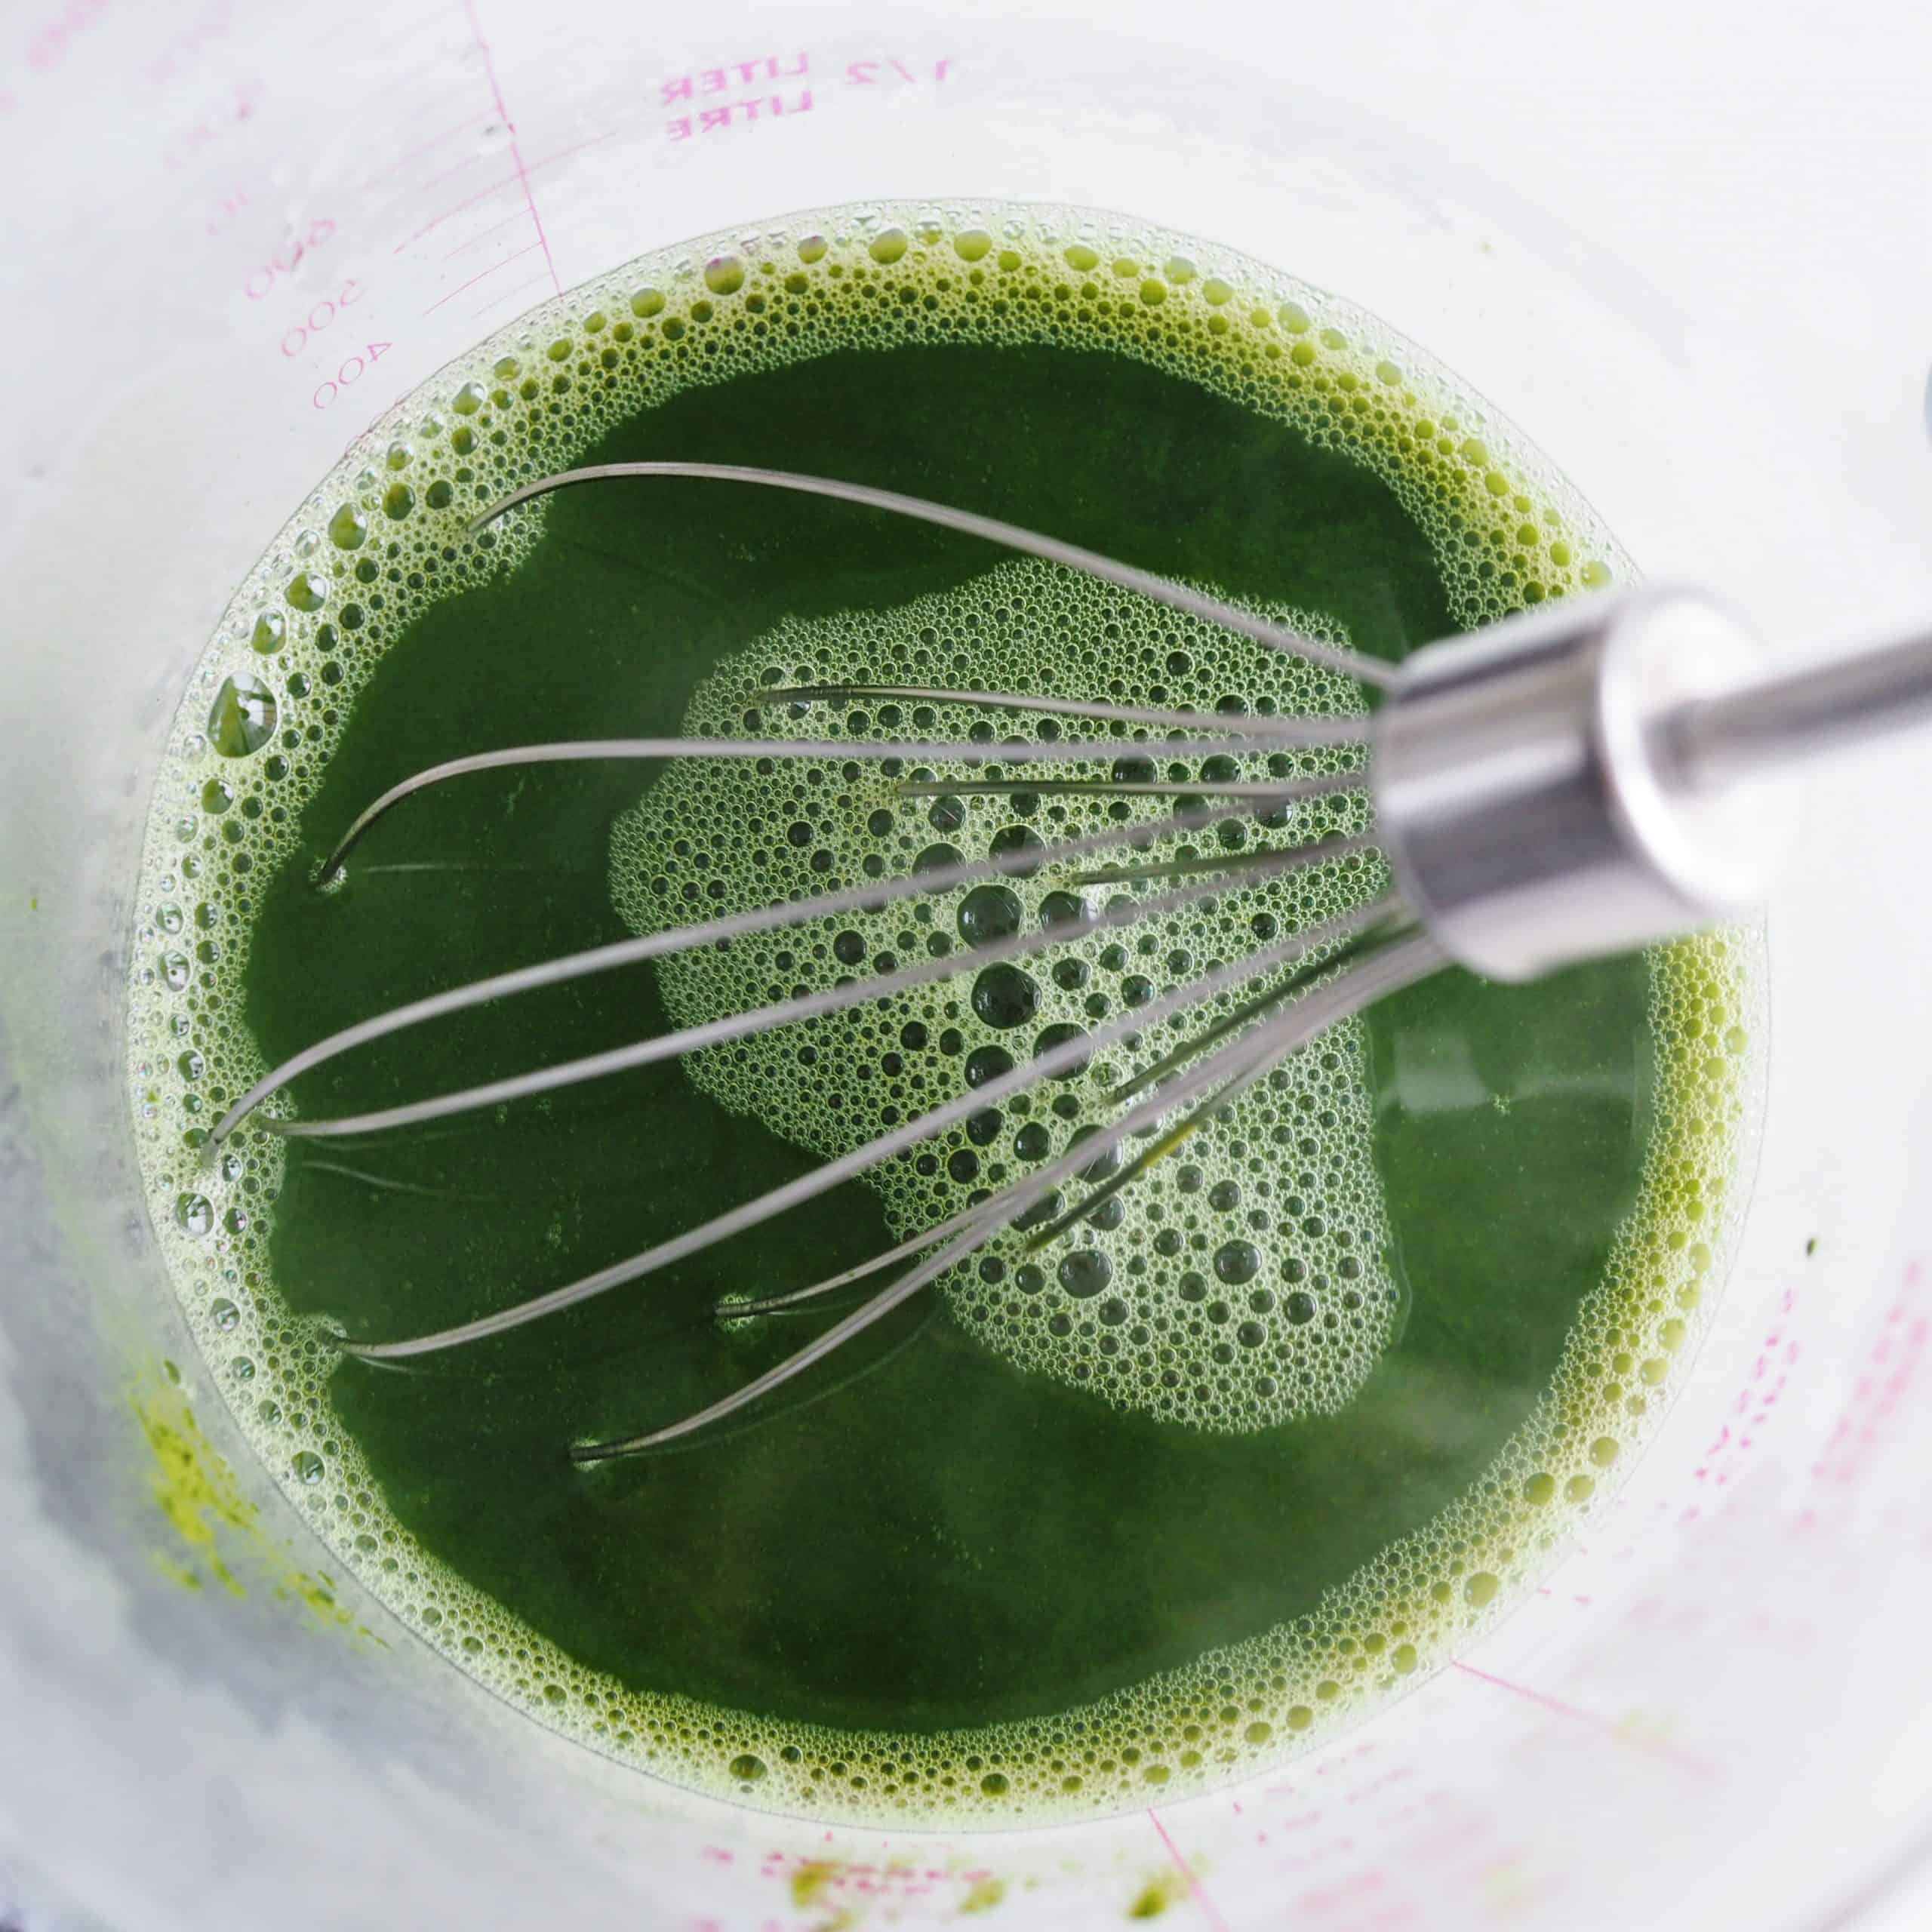 whisk matcha with hot water